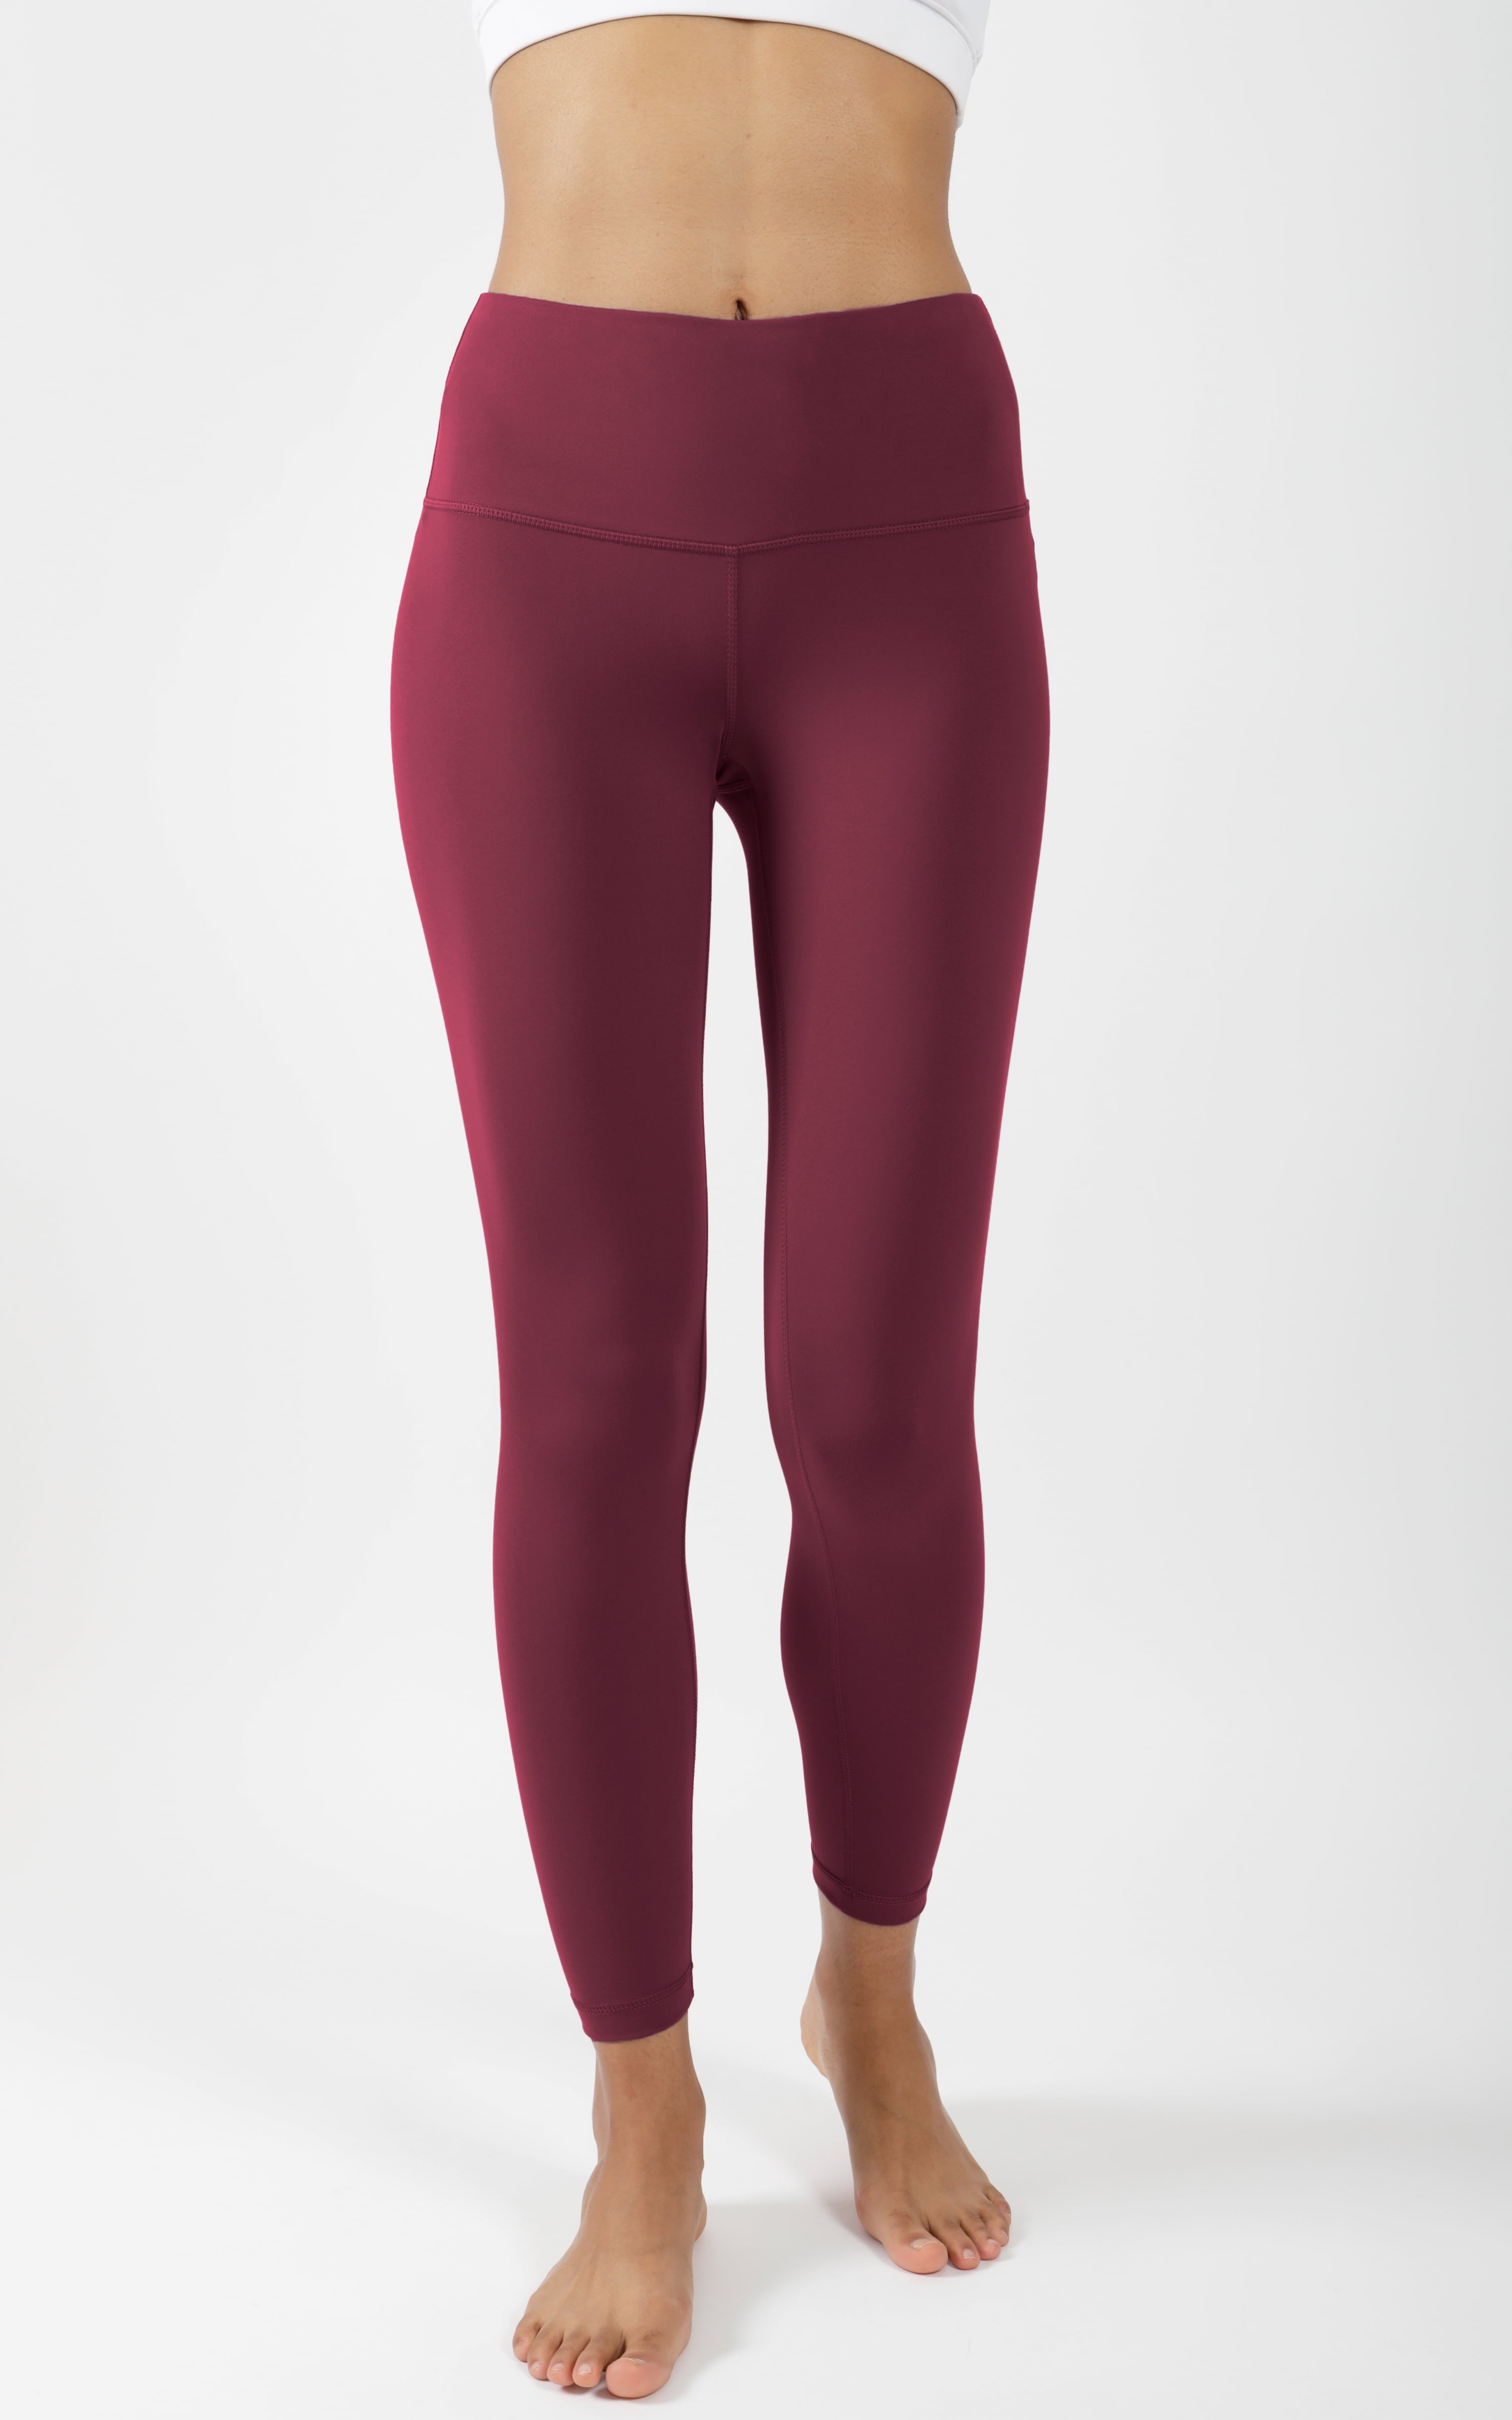  Yogalicious Lux High Waist Elastic Free Ankle Legging -  Cinnabar - XS : Clothing, Shoes & Jewelry